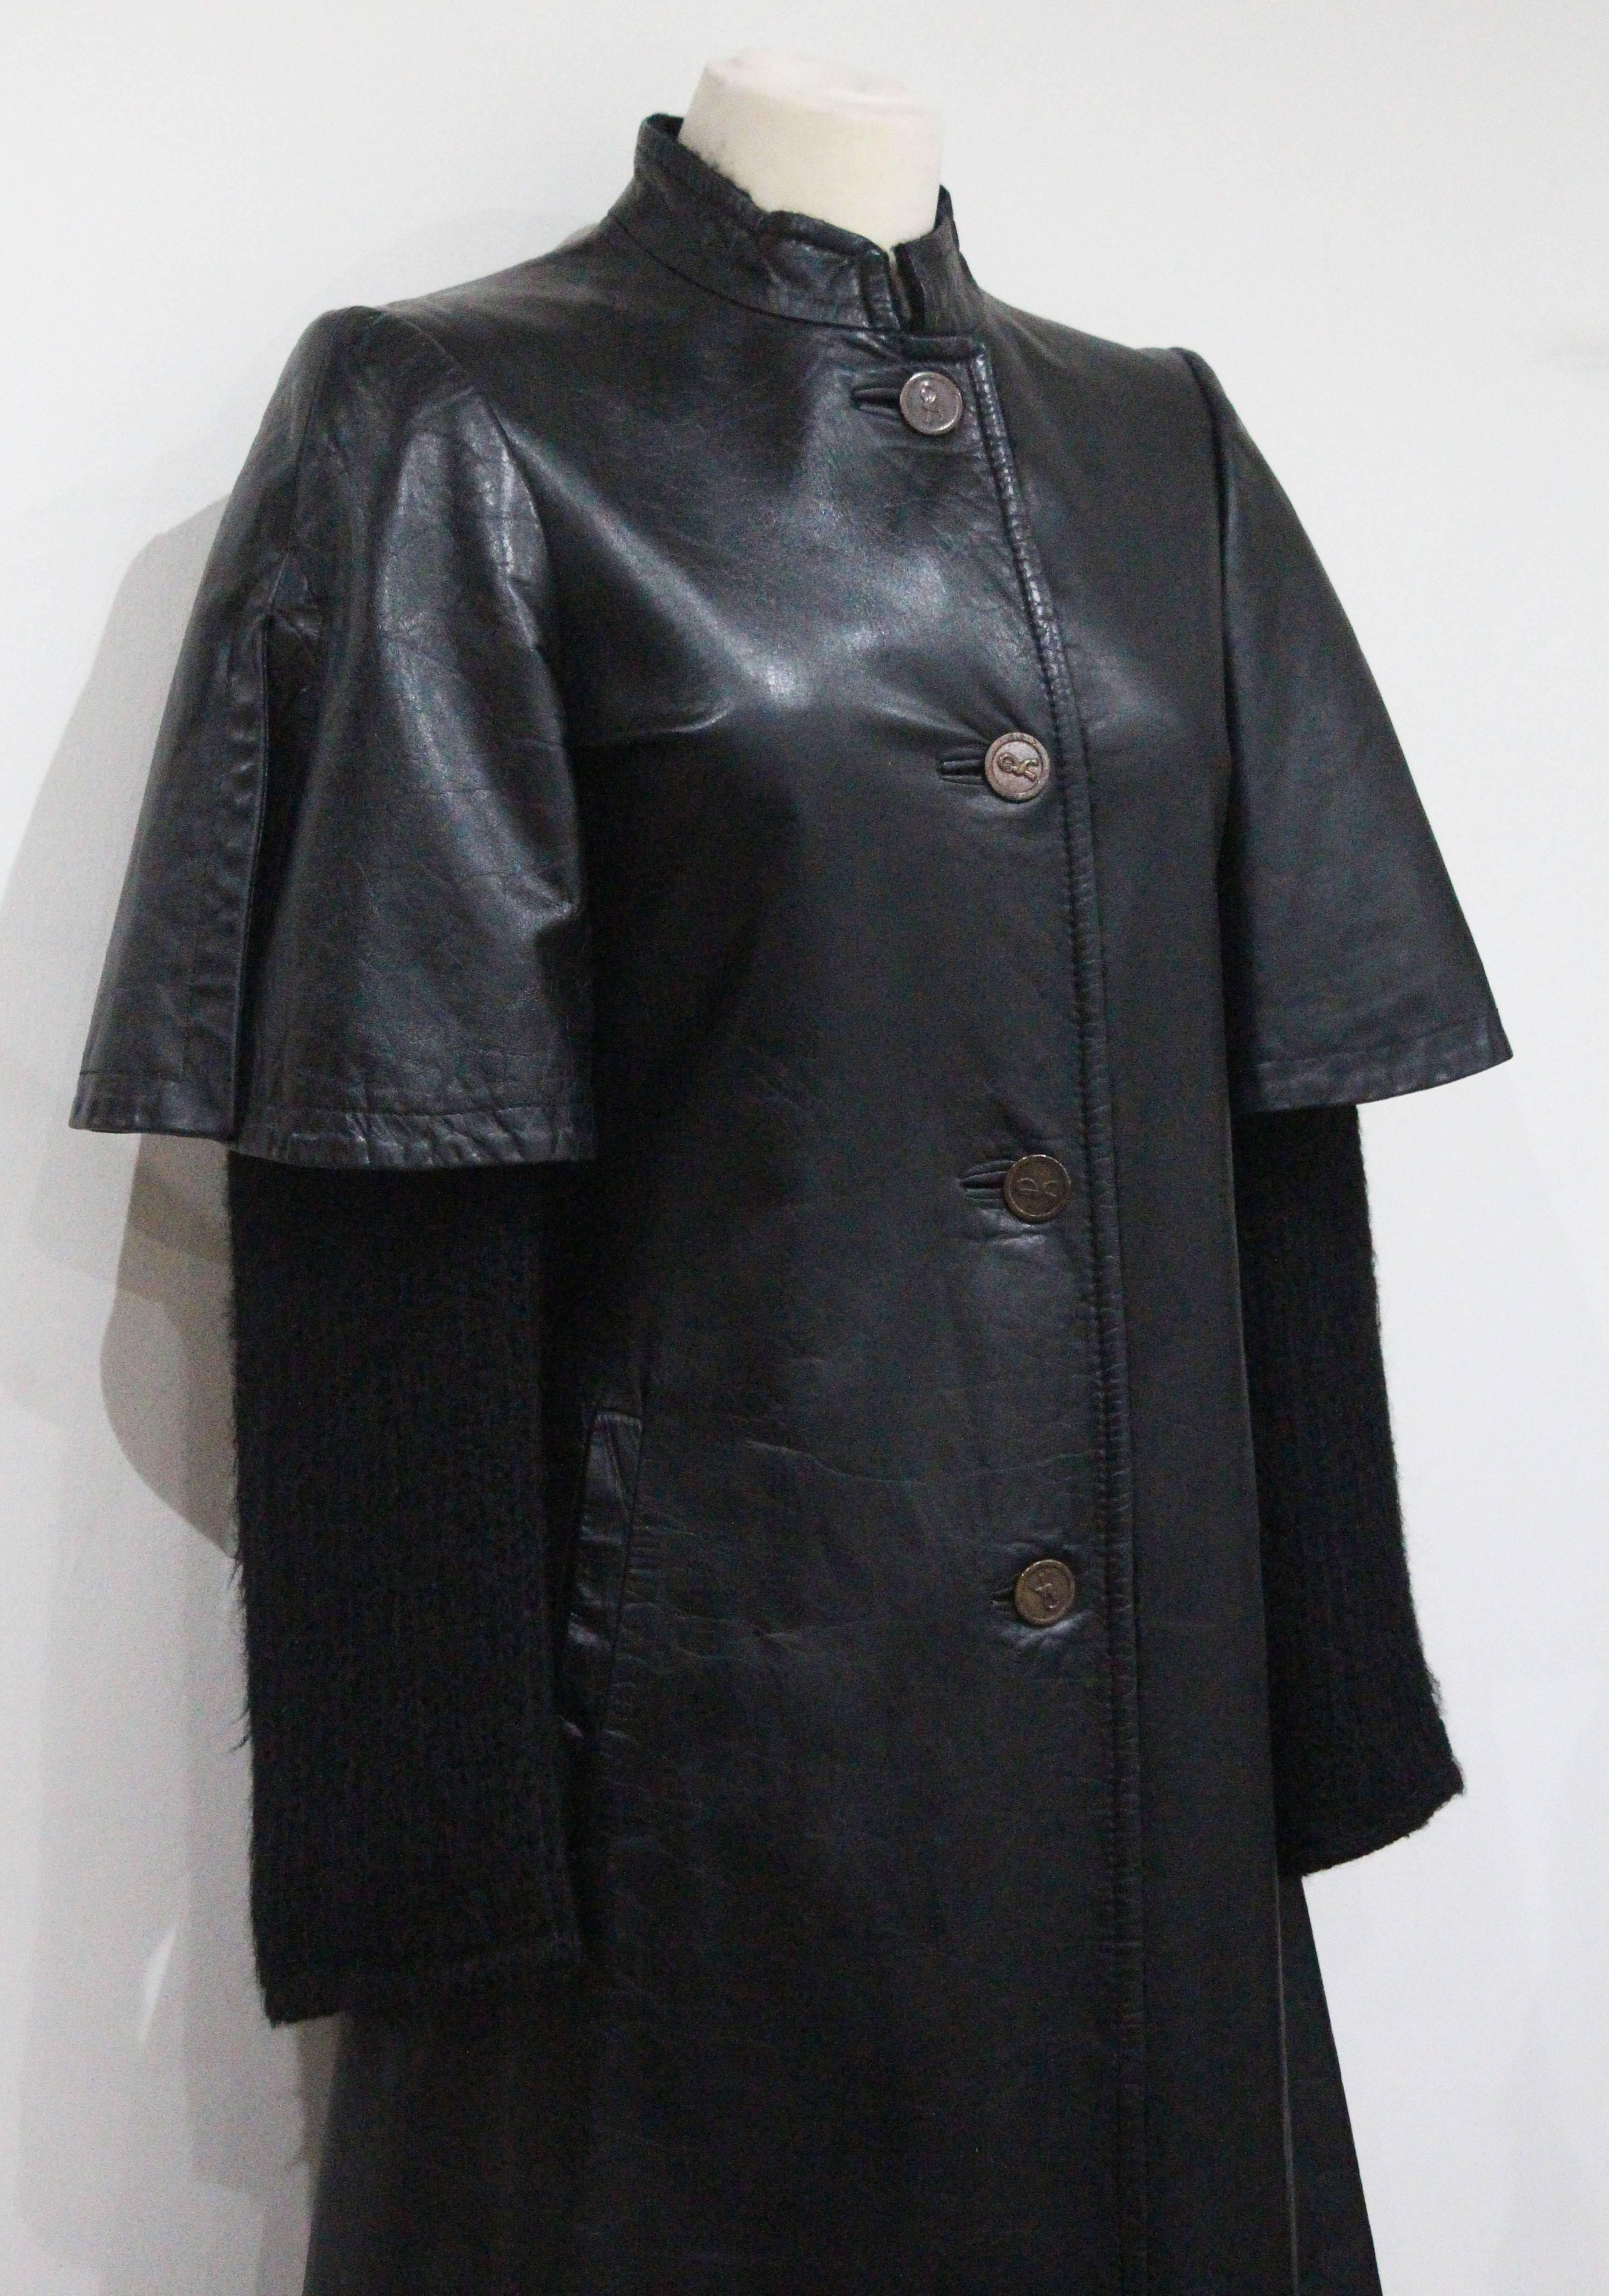 A Roberta Di Camerino black leather coat from the early 1970s. The coat is lined in knitted black wool and has knitted sleeves appearing underneath the leather cap sleeves with a slit. 

Made in Italy 

Size Small